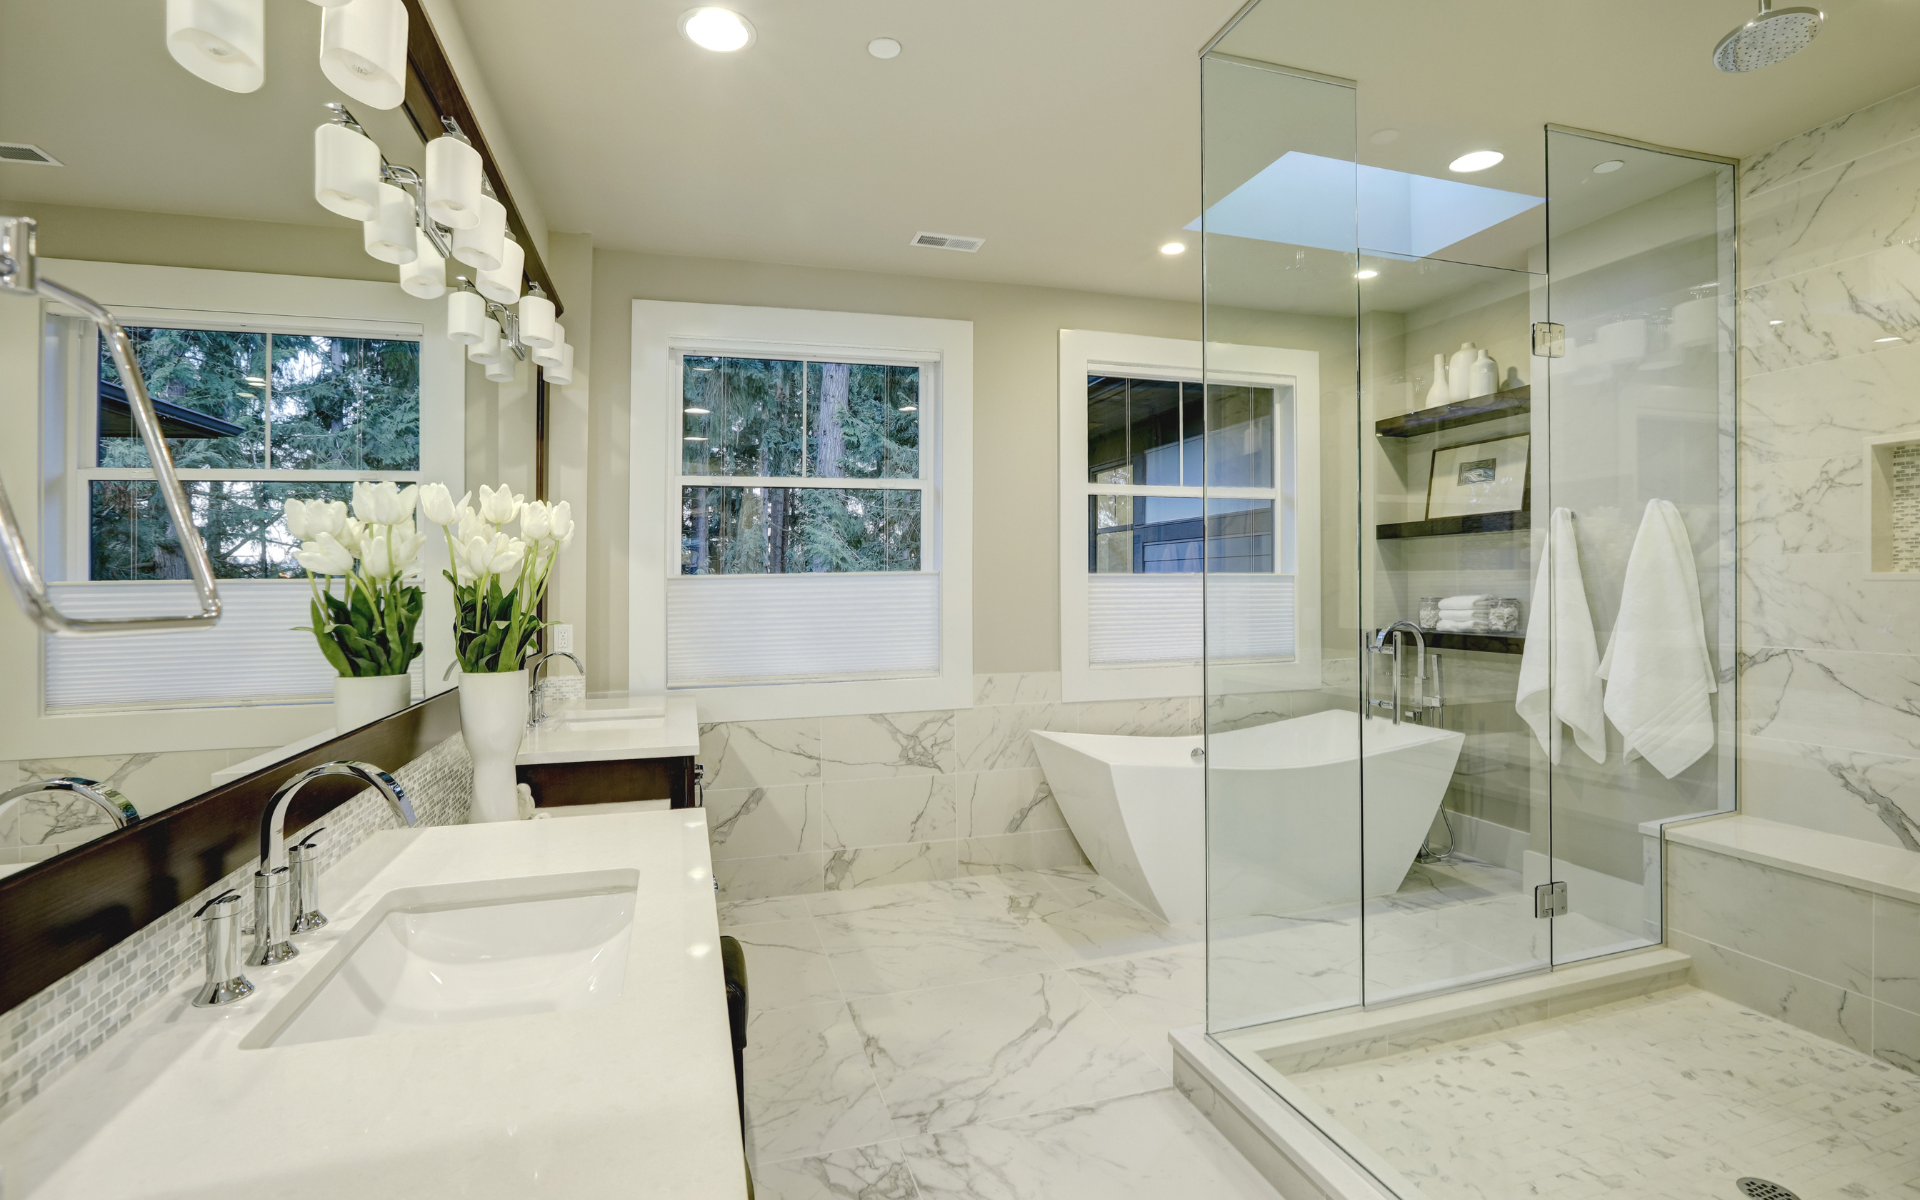 Bathroom design with tub, shower, and vanity